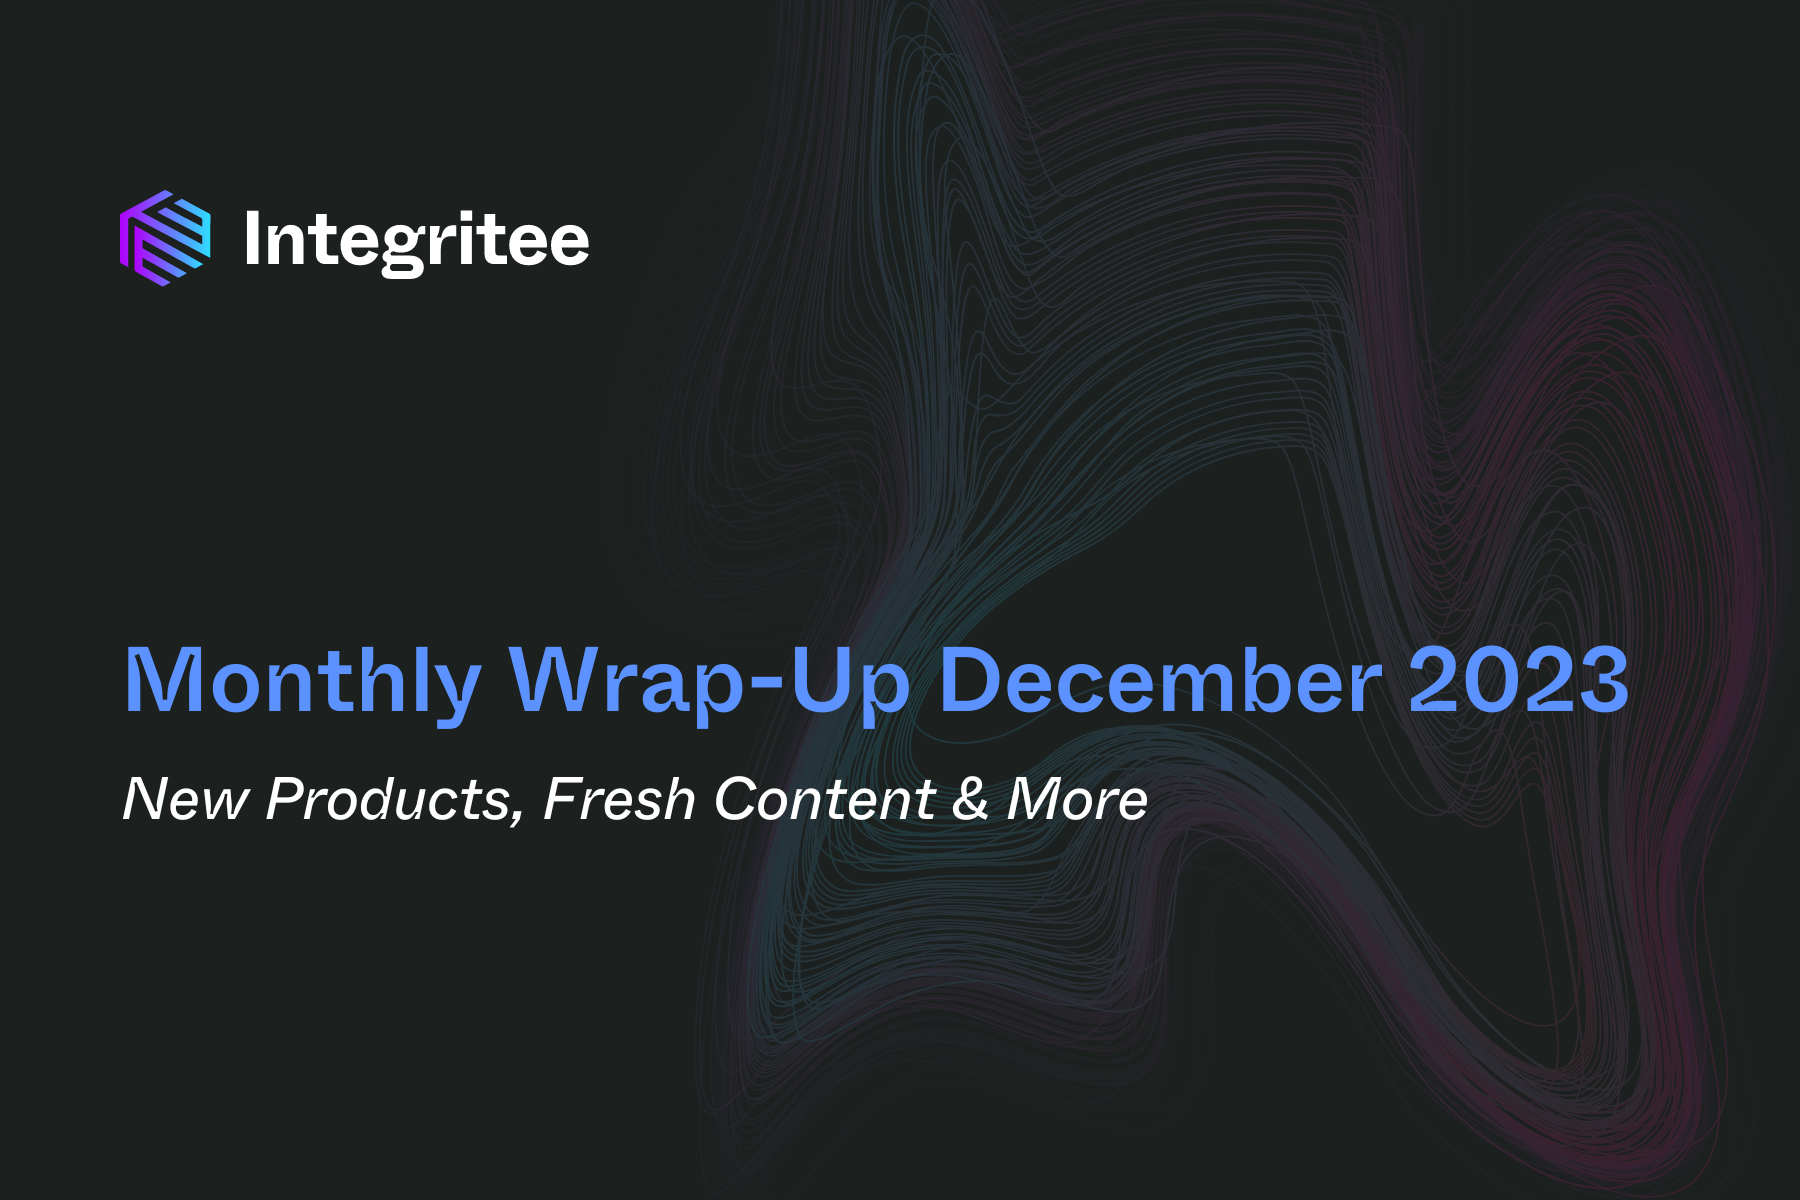 Monthly Wrap-Up December 2023: New Products, Fresh Content & More